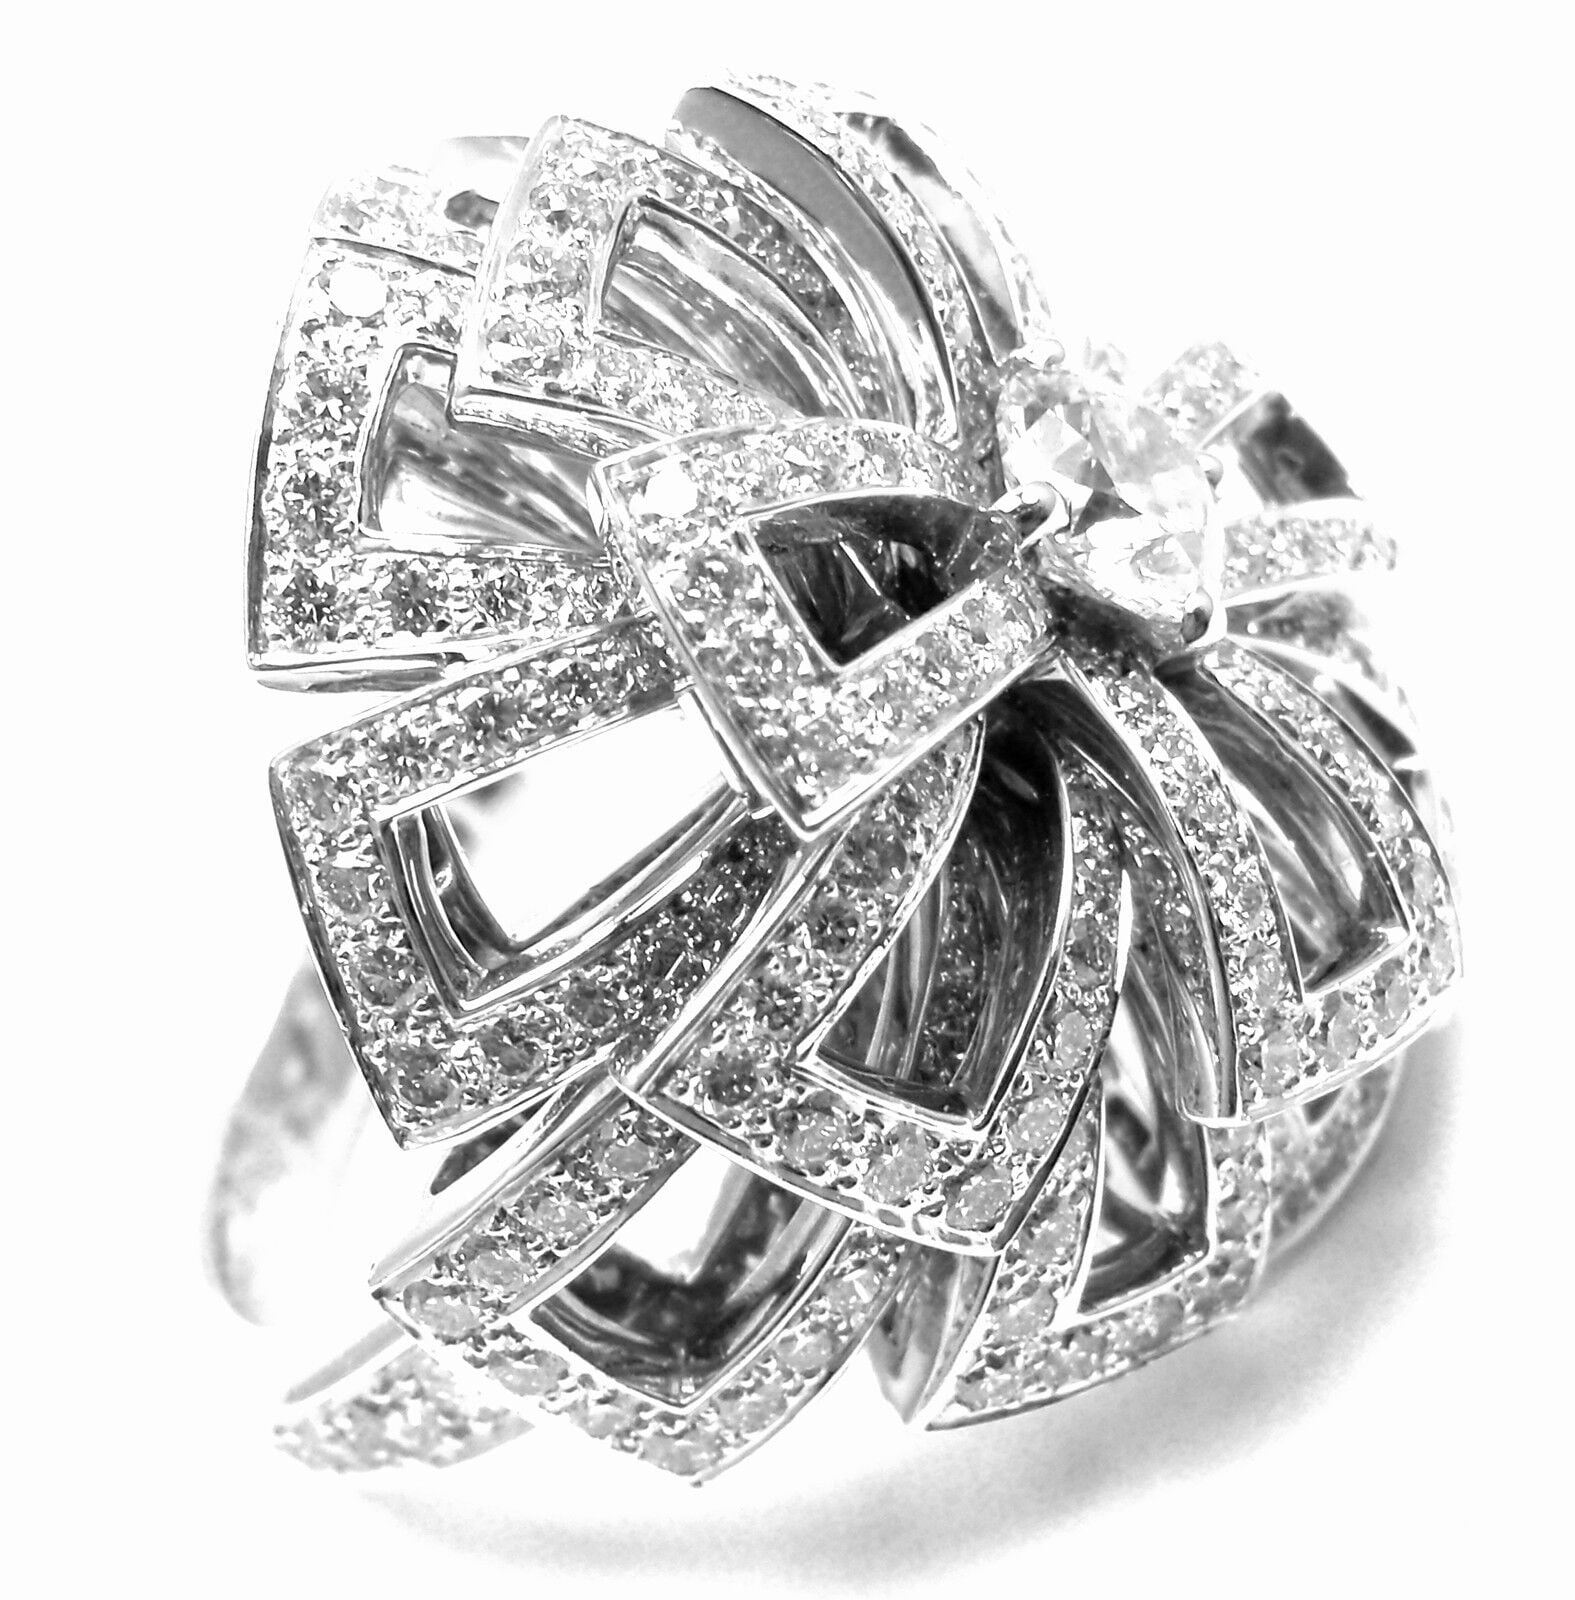 Rare! Authentic Chanel Flower 18K White Gold Diamond Large Ring